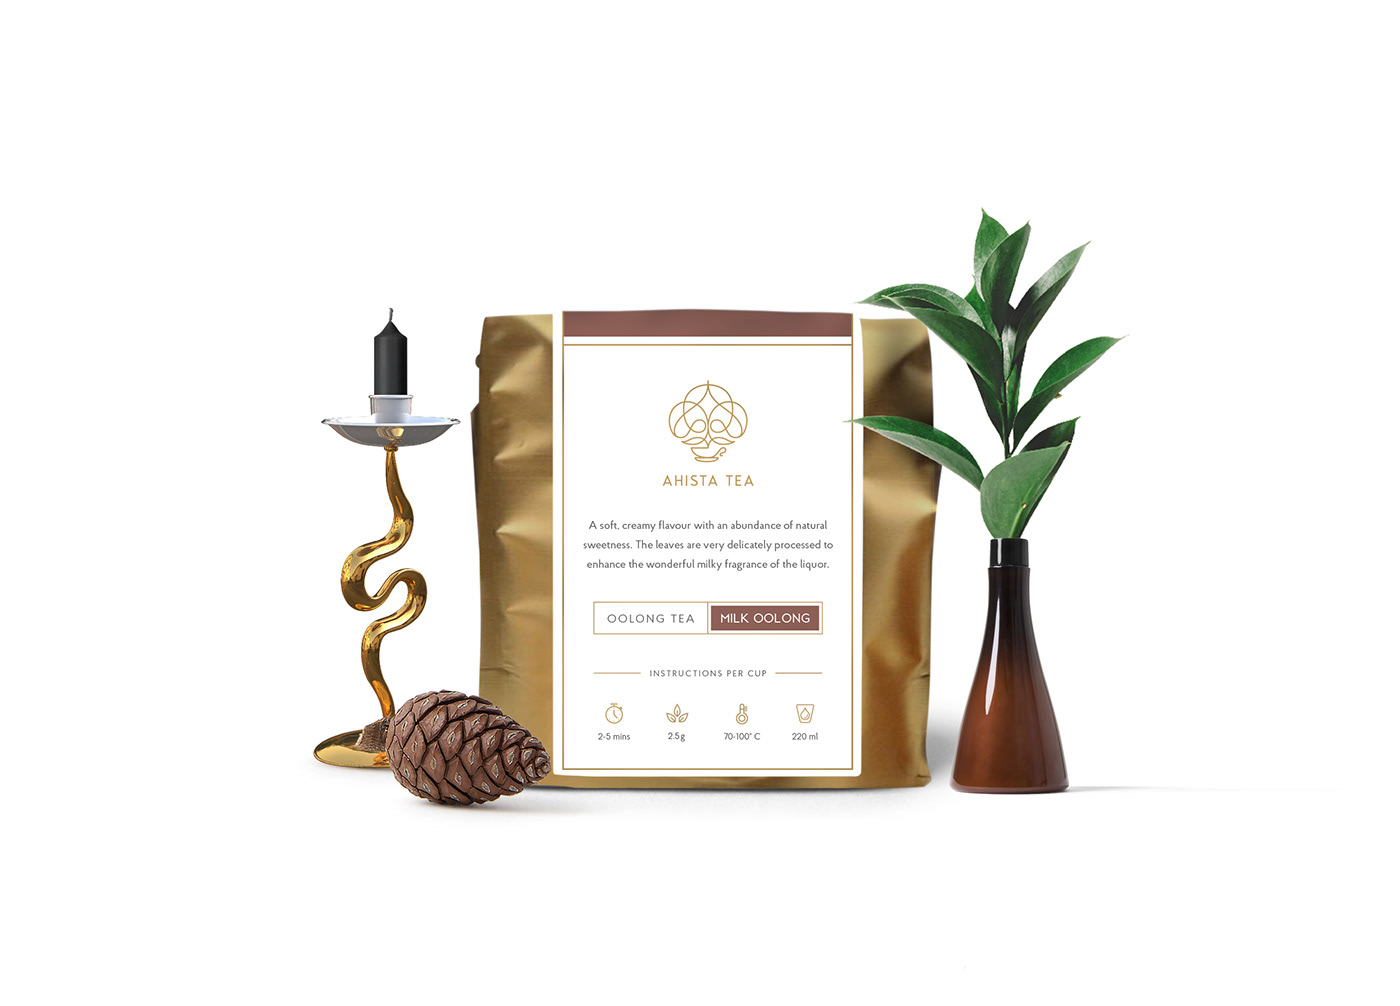 ahista tea Packaging Stand up pouch Pouch Packaging graphic design  minimal classy luxury India